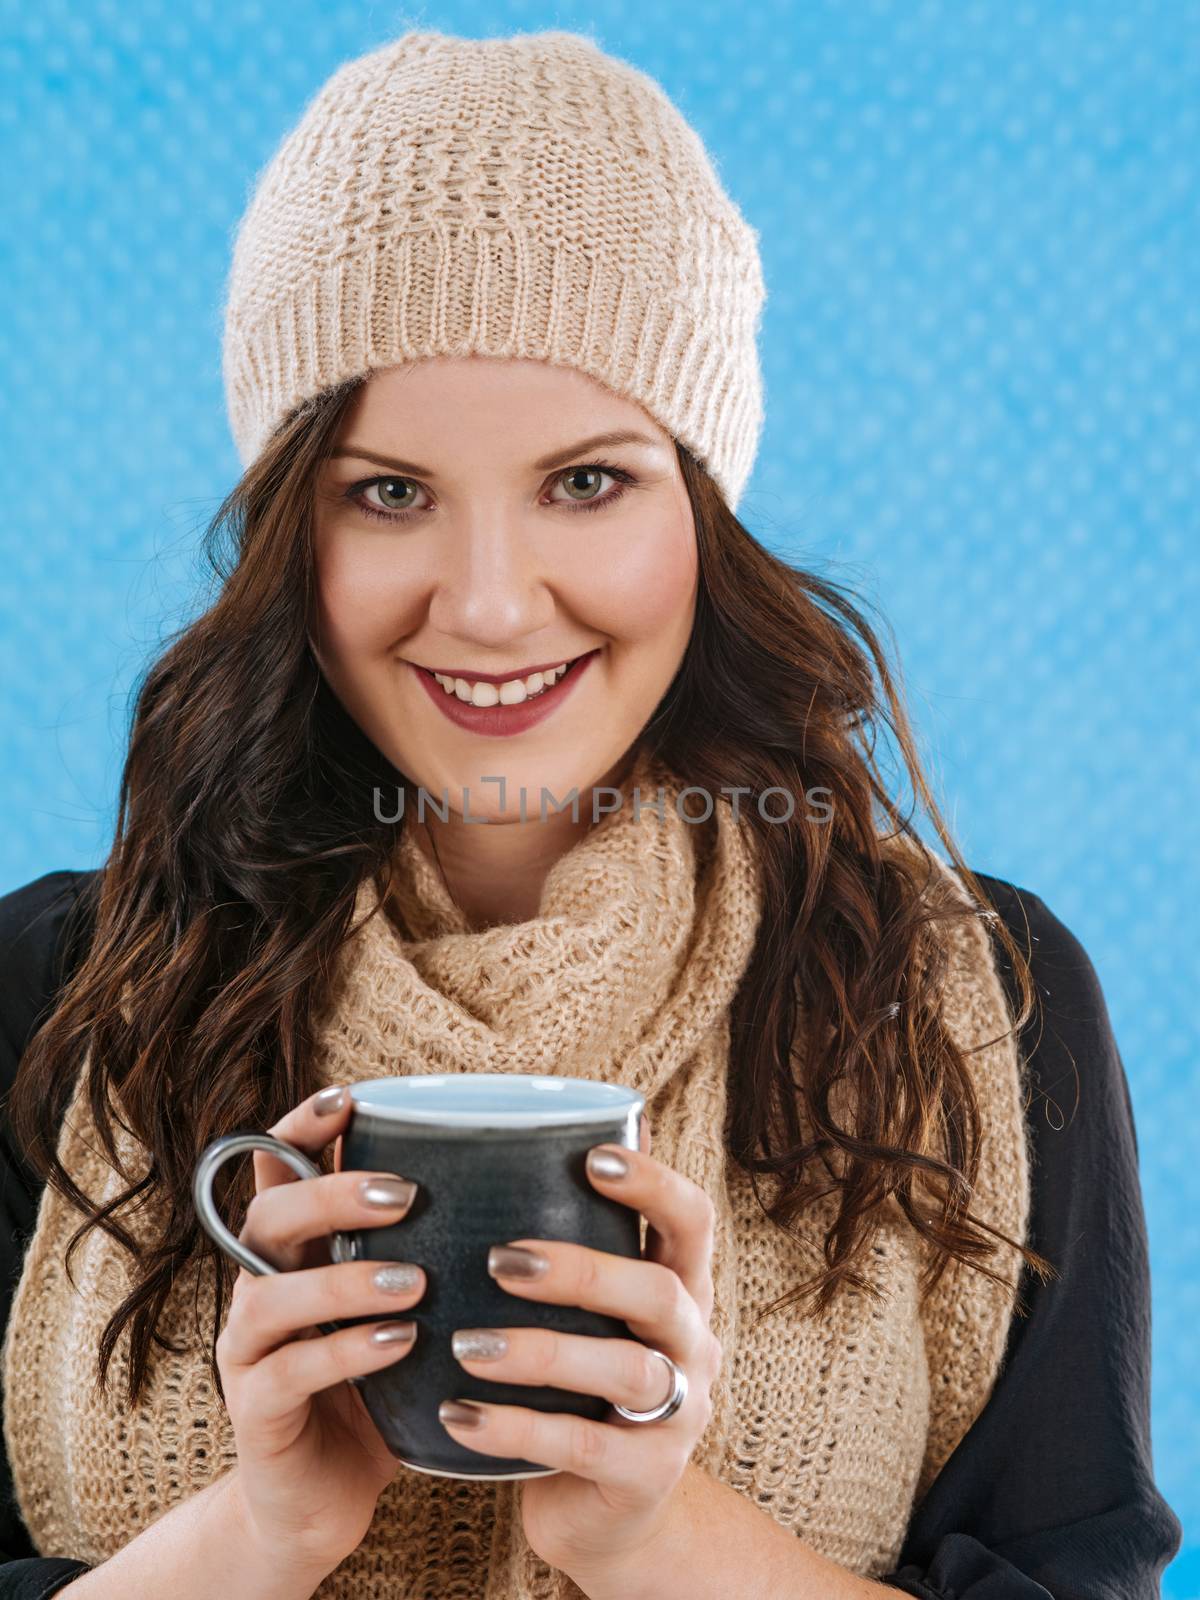 Drinking coffee on a cold day by sumners